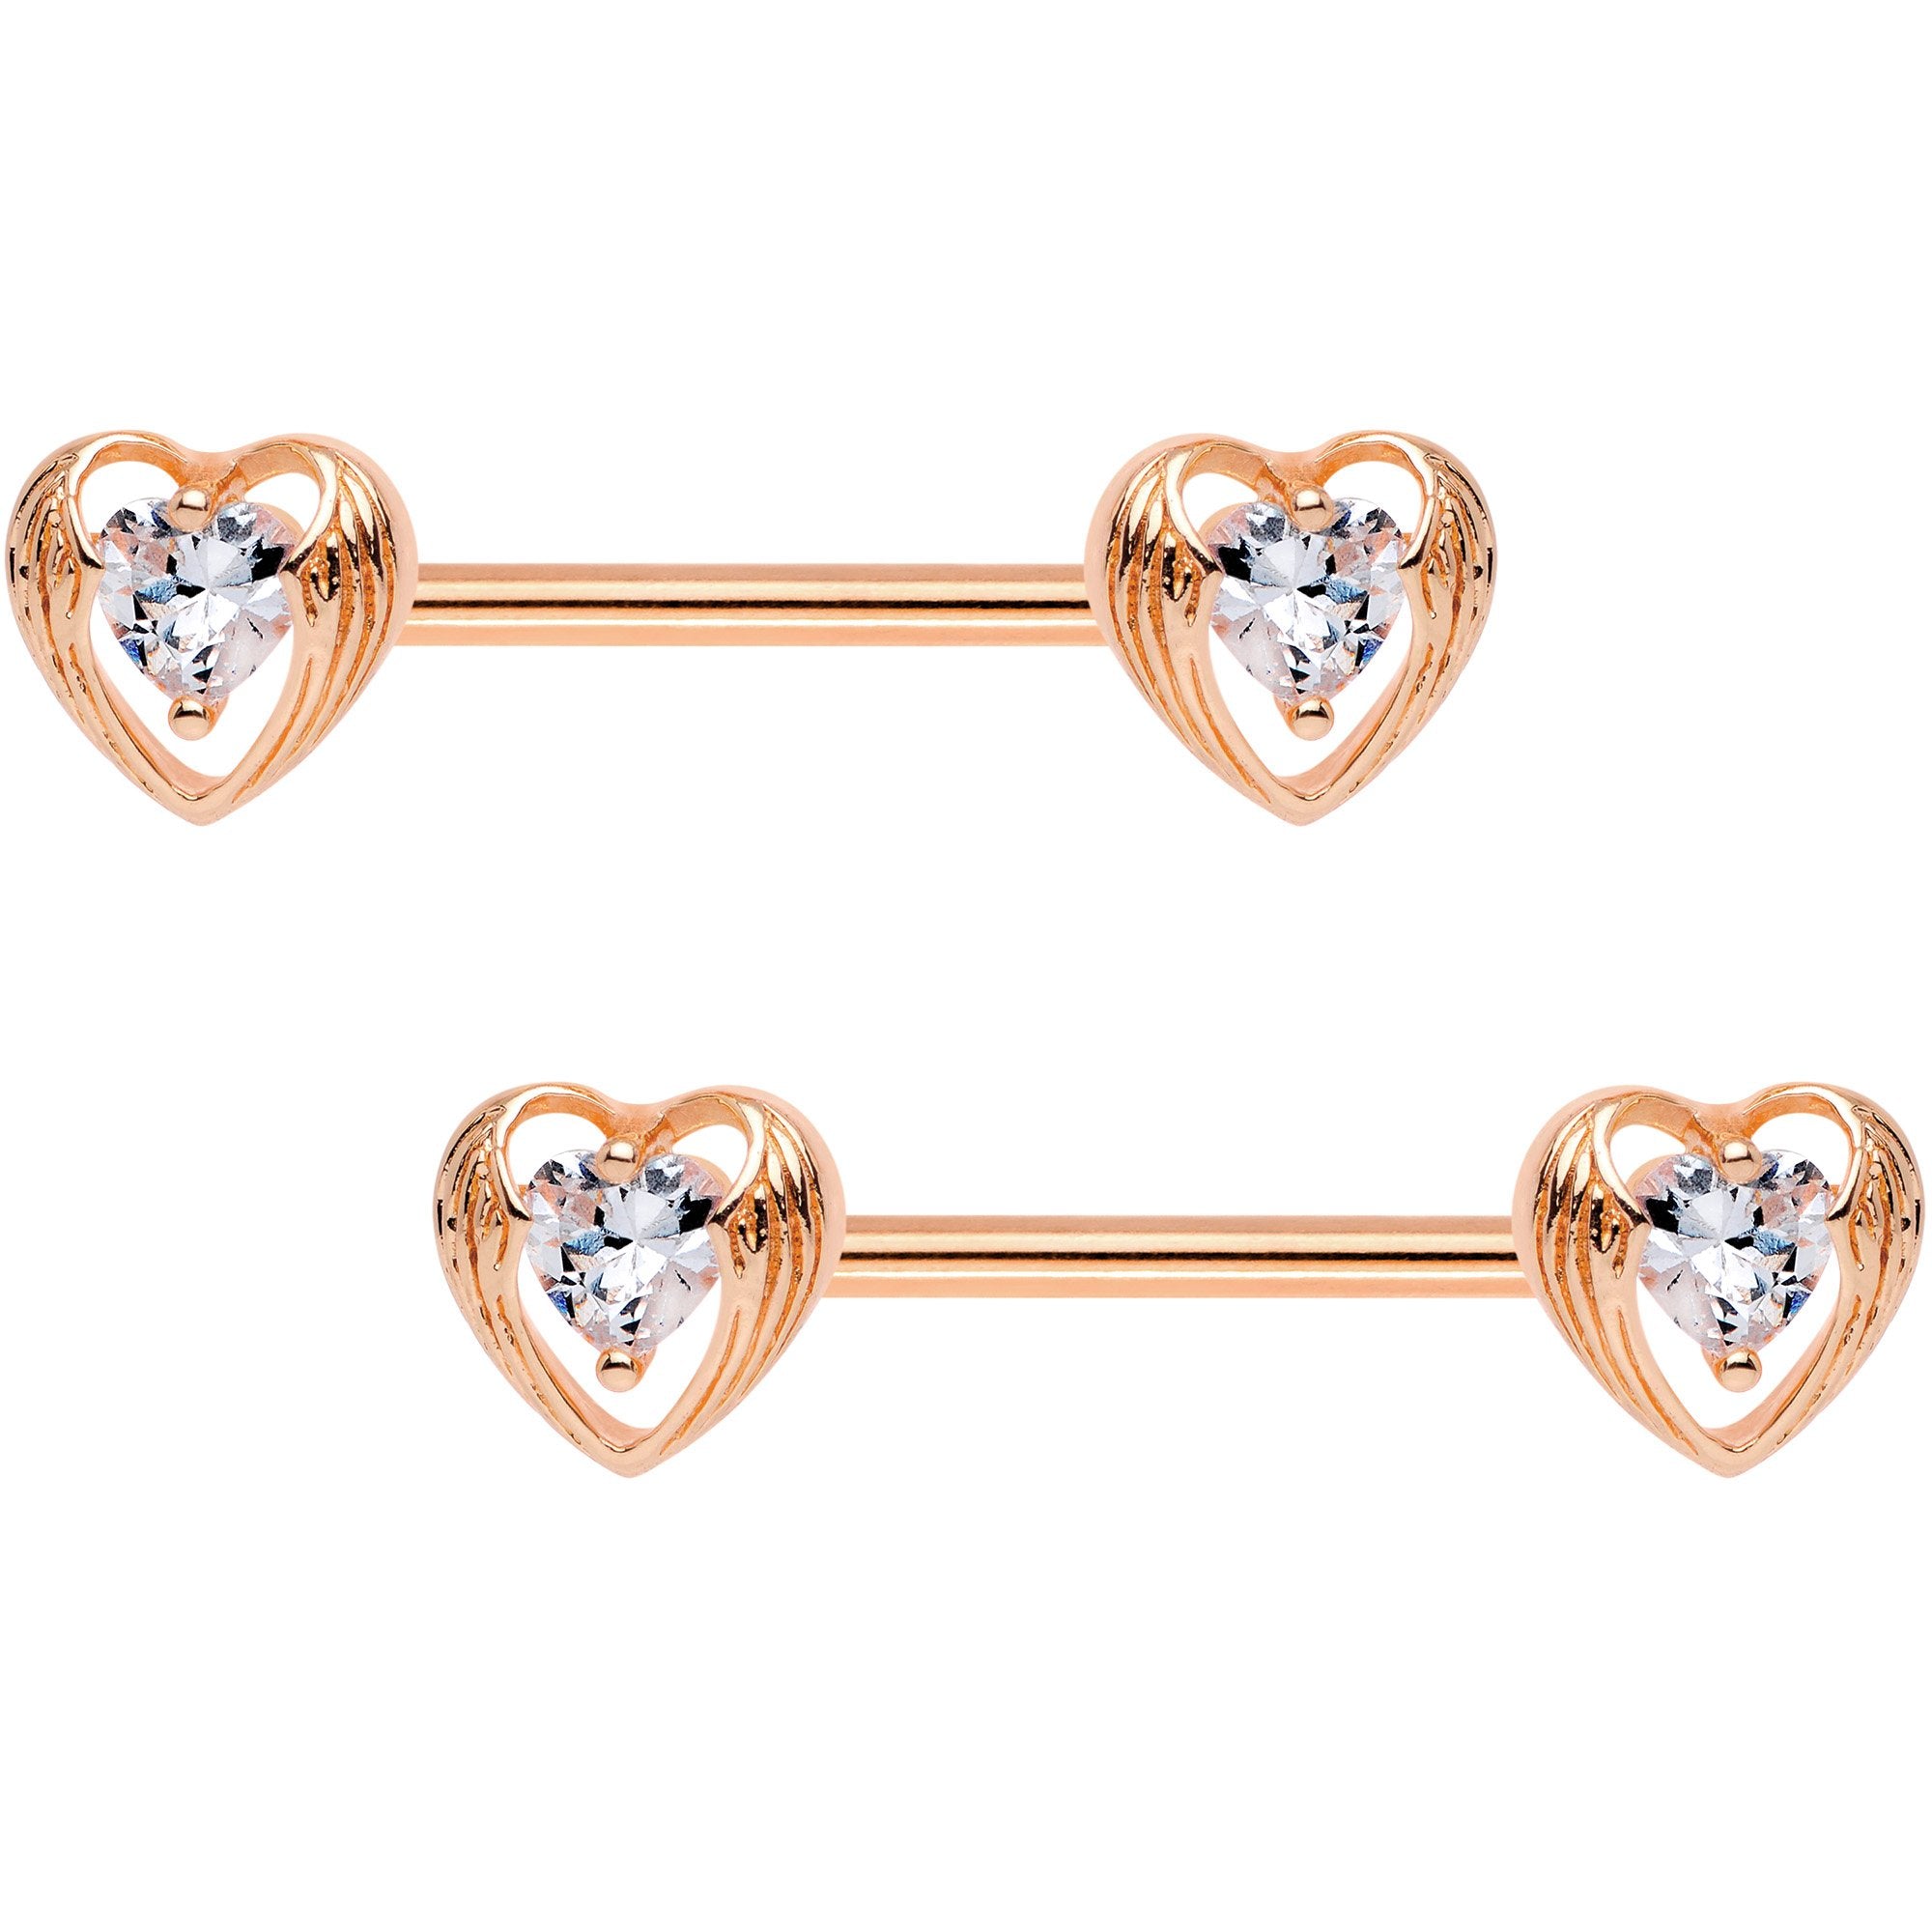 Clear CZ Rose Gold Tone Anodized Hugged Heart Barbell Nipple Ring Set